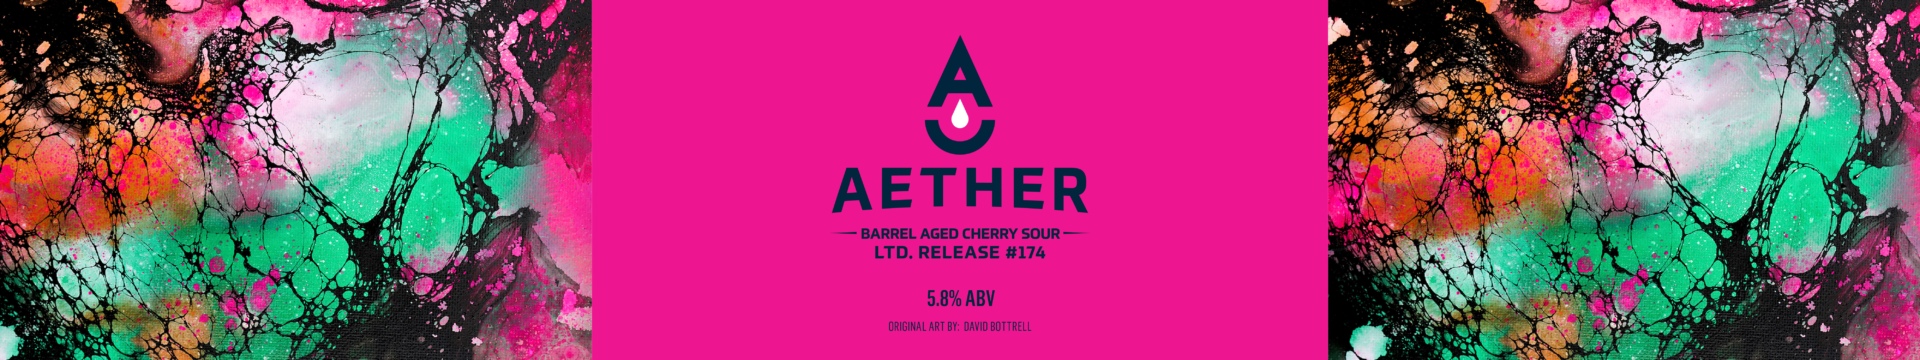 Aether #174 Barrel Aged Cherry Sour Banner